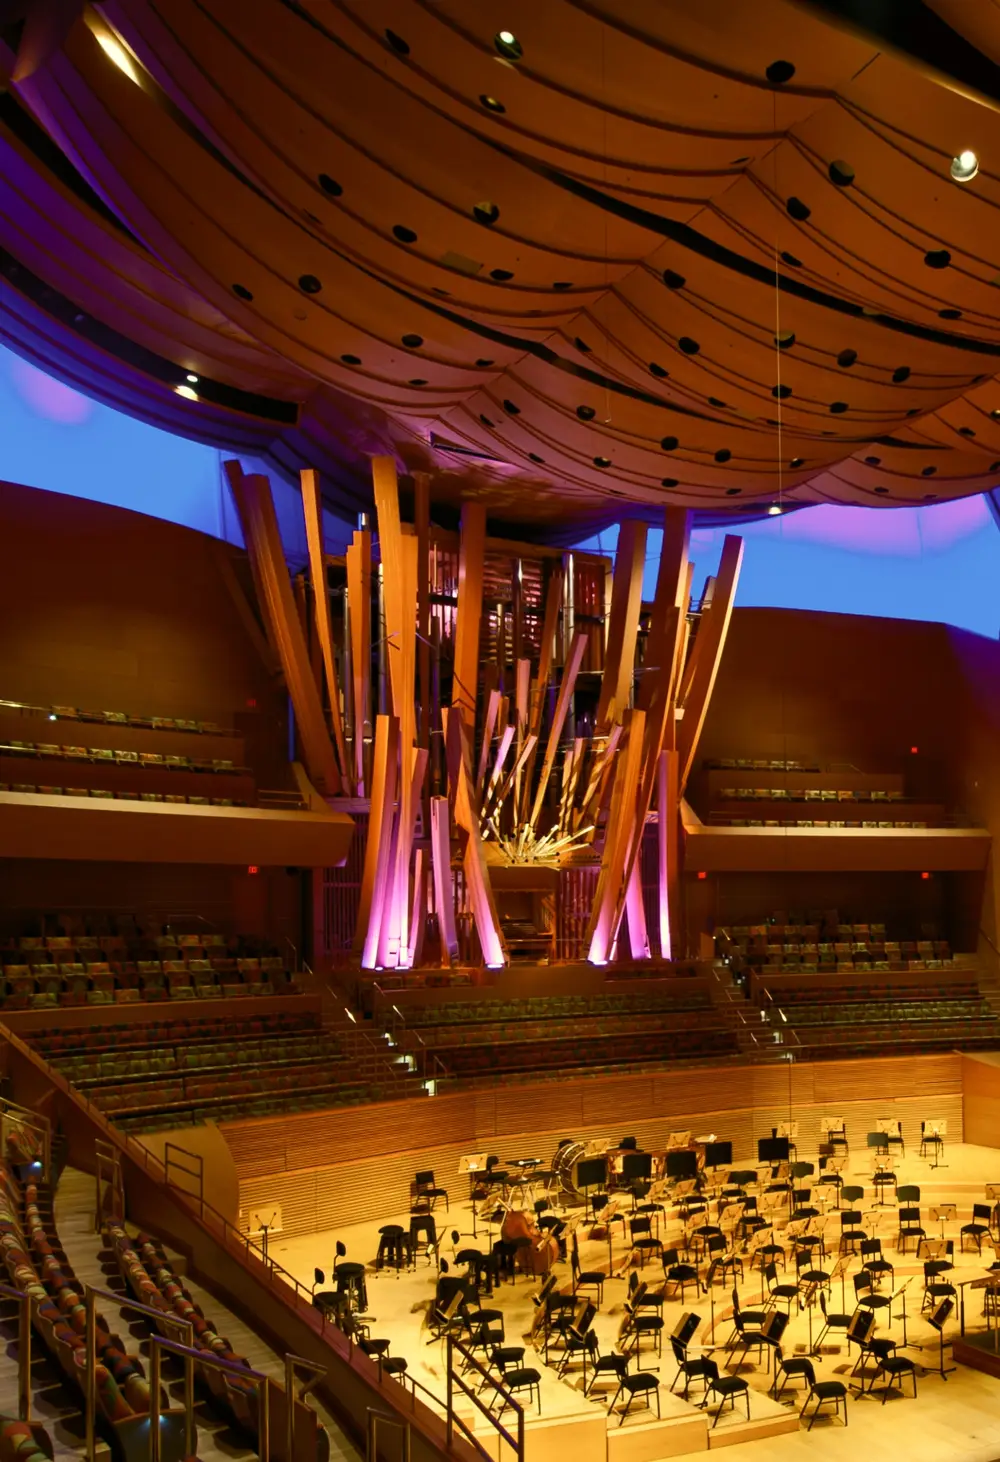 An interior view of Walt Disney Concert Hall from an upper level towards the stage and organ. The hall and seats that surround the stage on all sides are empty, showcasing the sweeping forms and warm colors of the hall's interior architecture.